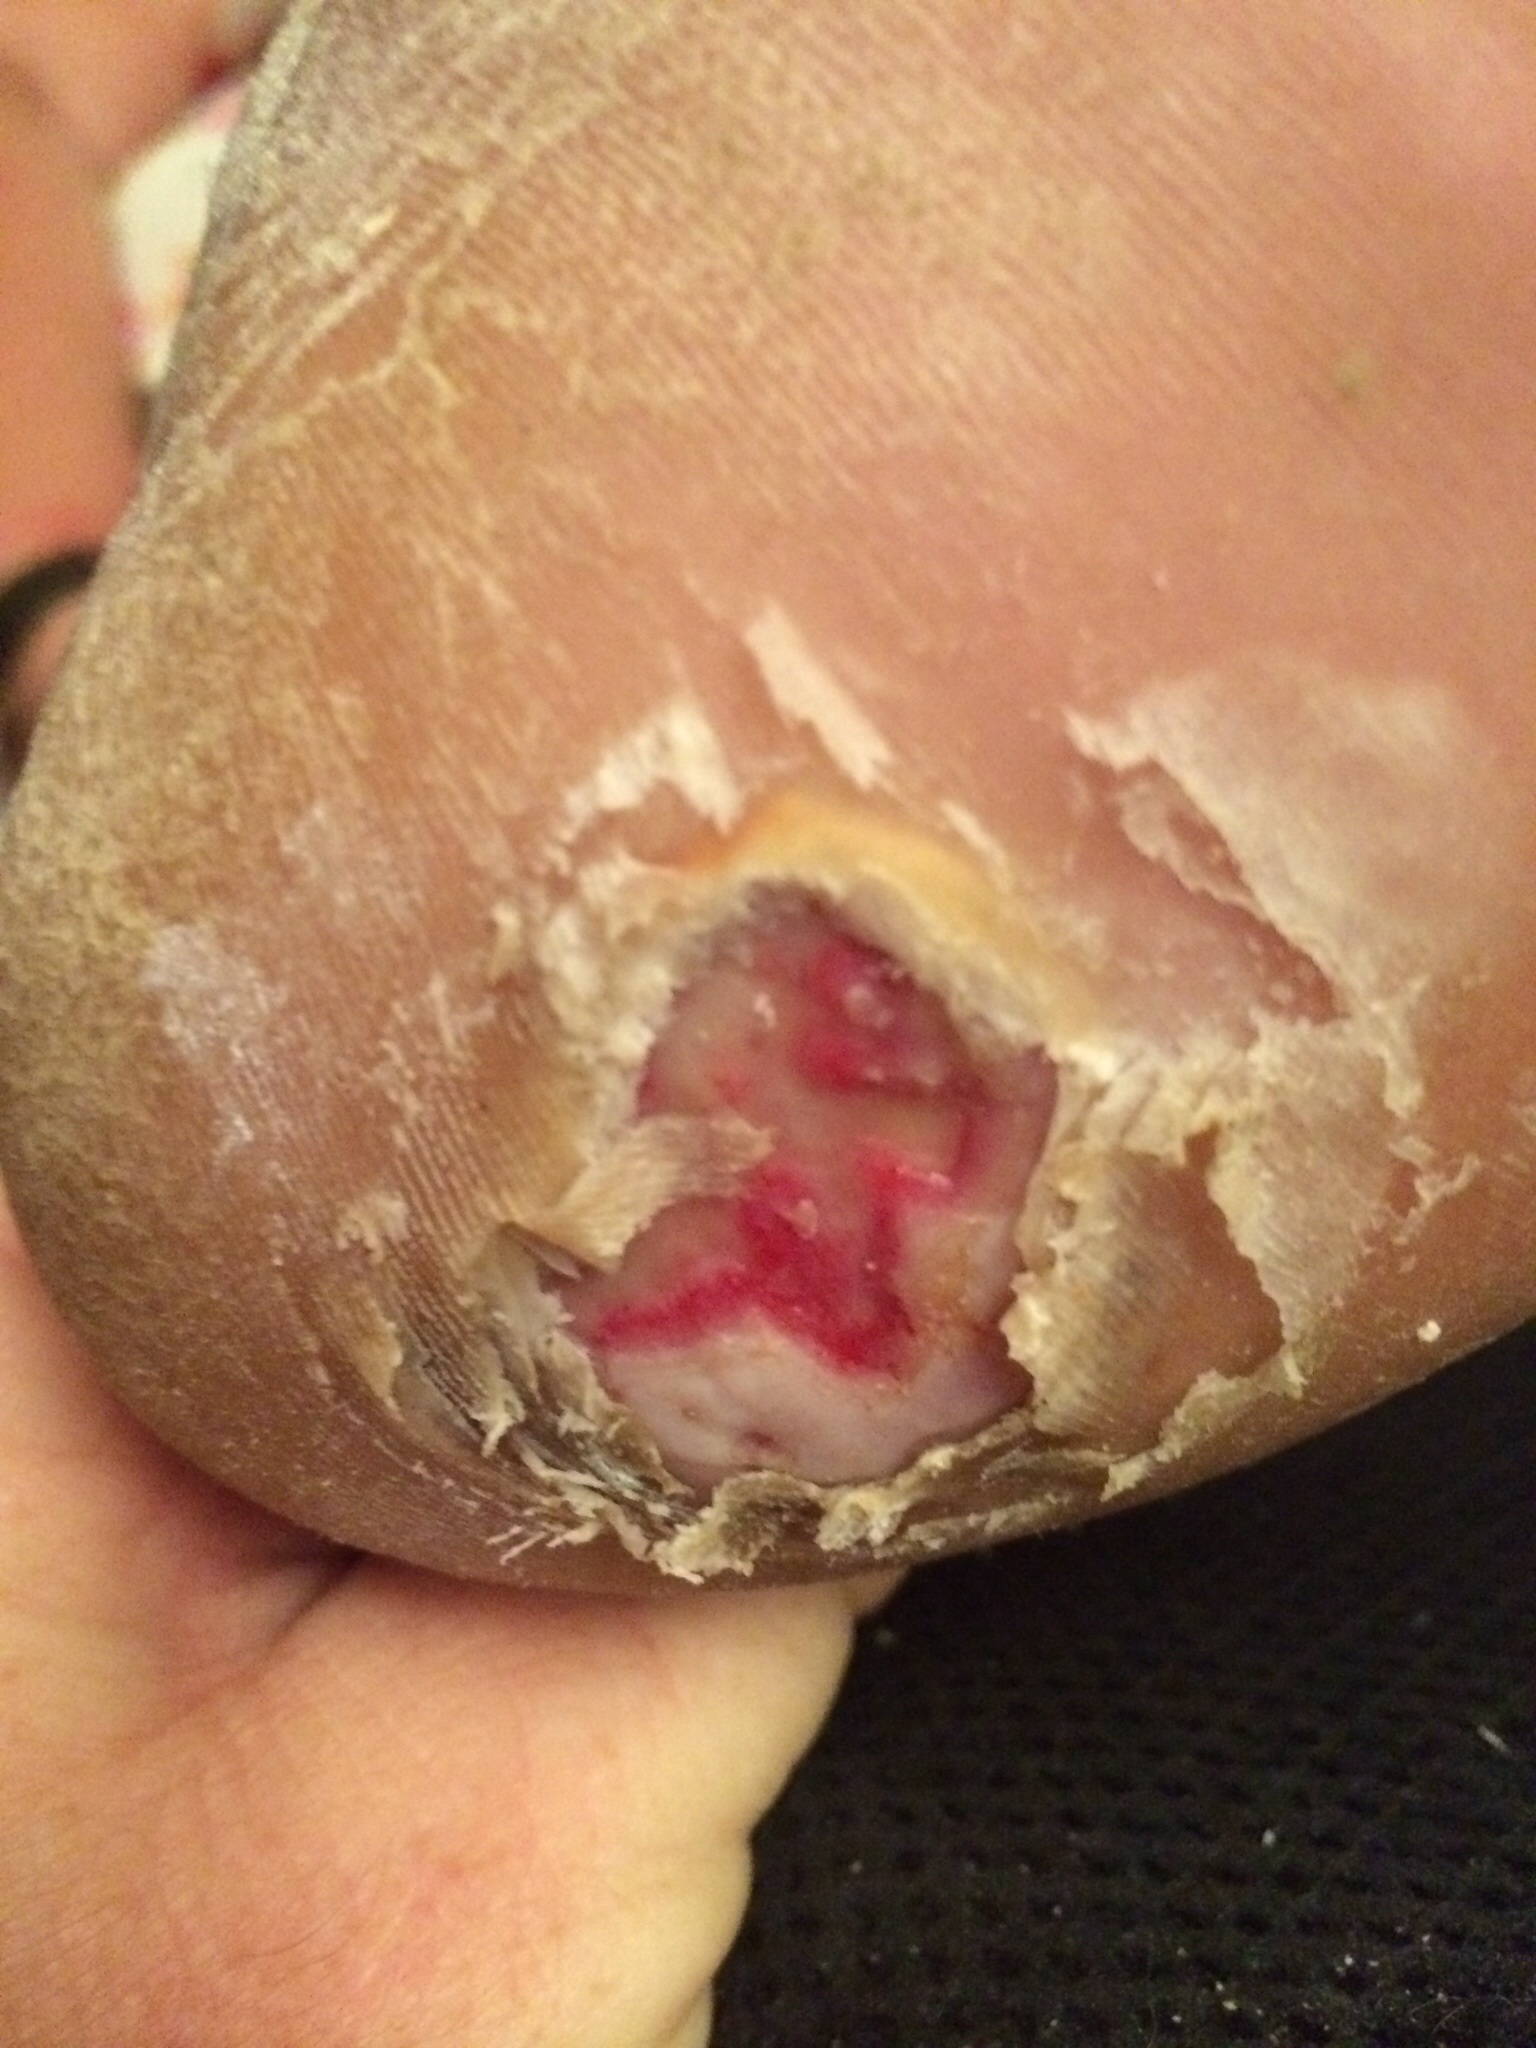 Left heel with ulceration down several layers of skin